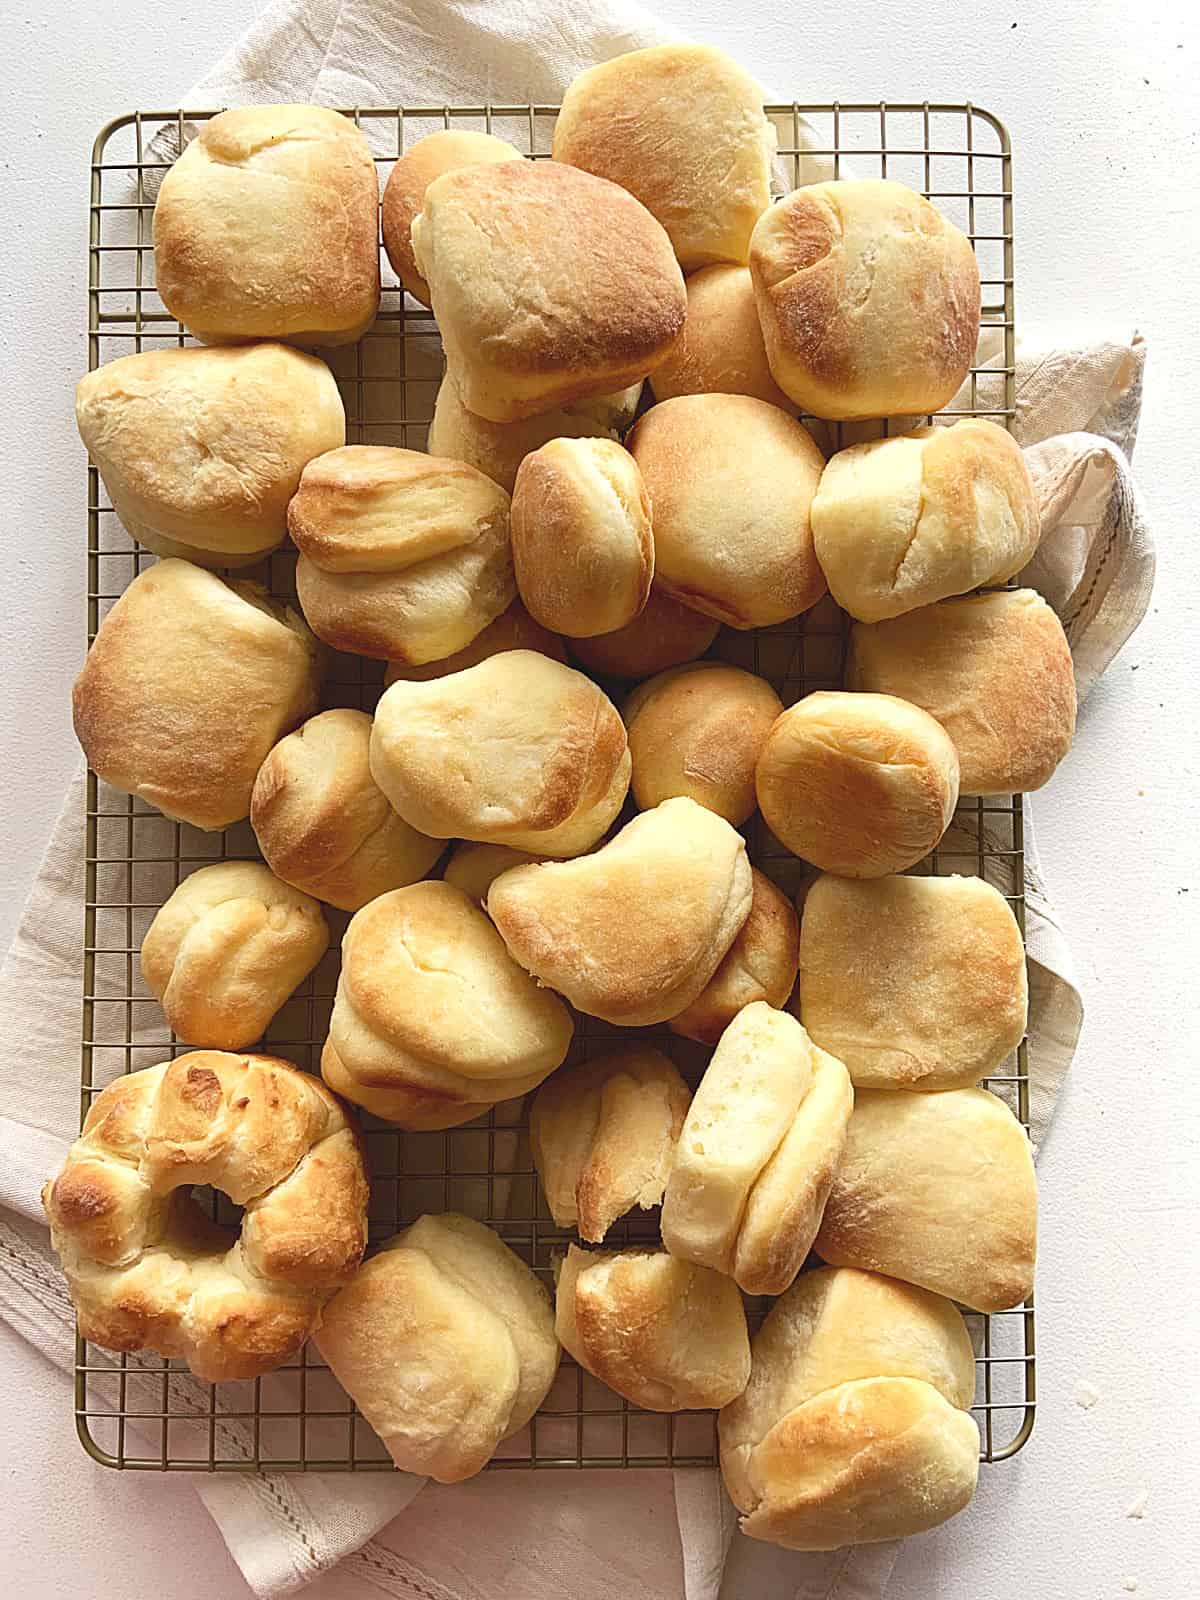 Top view of rectangular wire rack with golden dinner rolls of different sizes